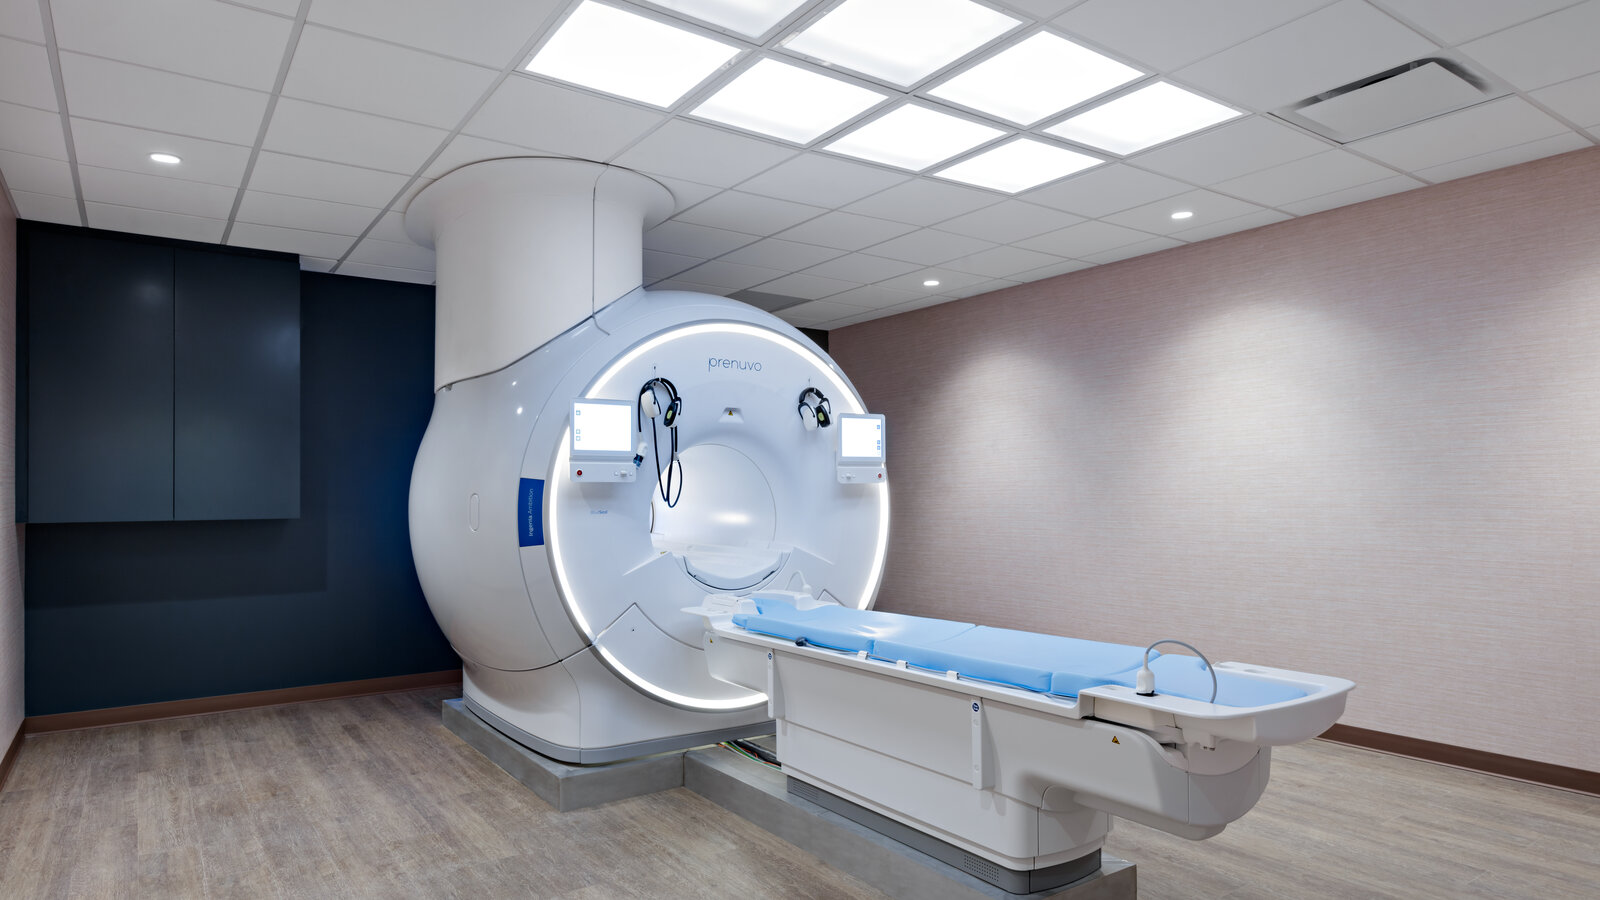 y-combinators-call-for-100-times-more-mri-scans